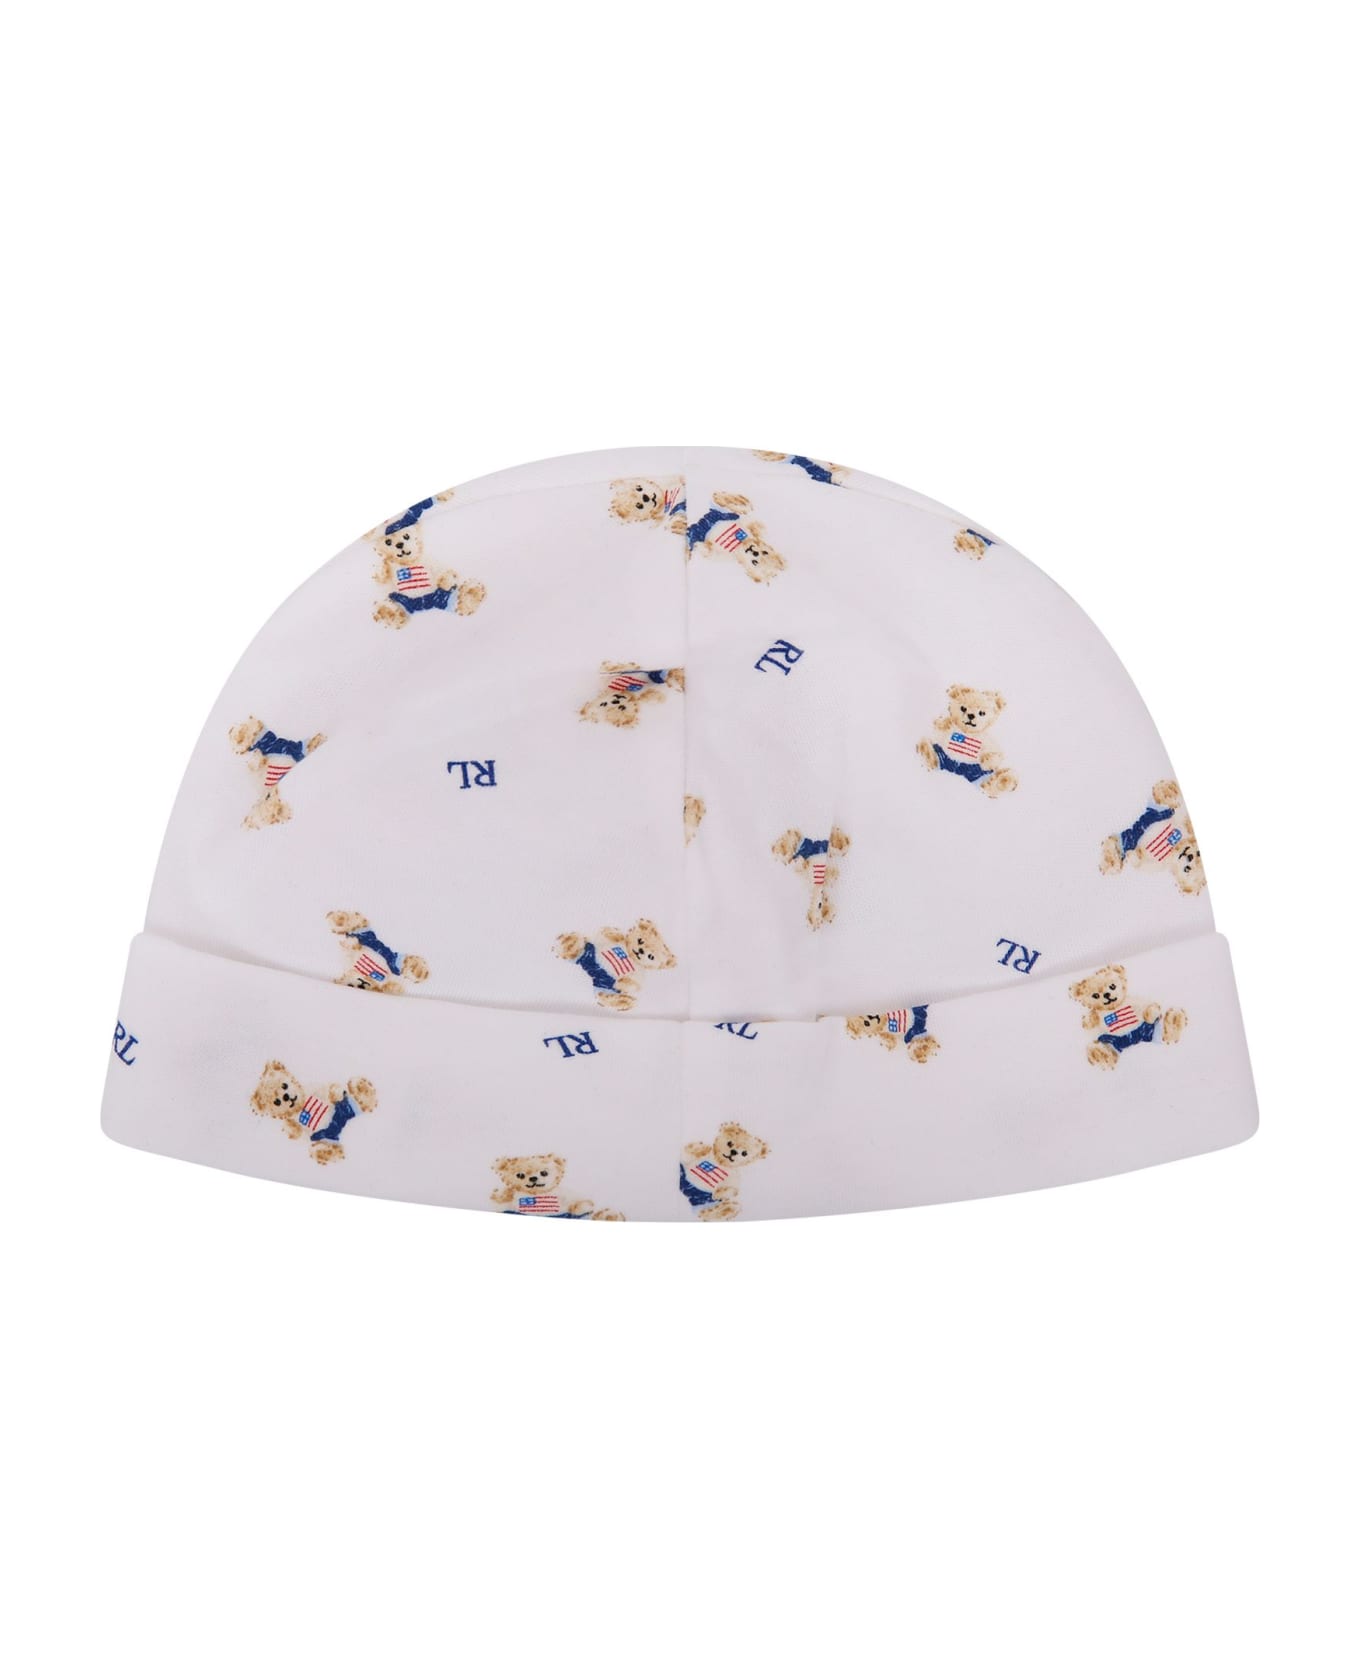 Ralph Lauren White Hat For Babyboy With Bears - White アクセサリー＆ギフト